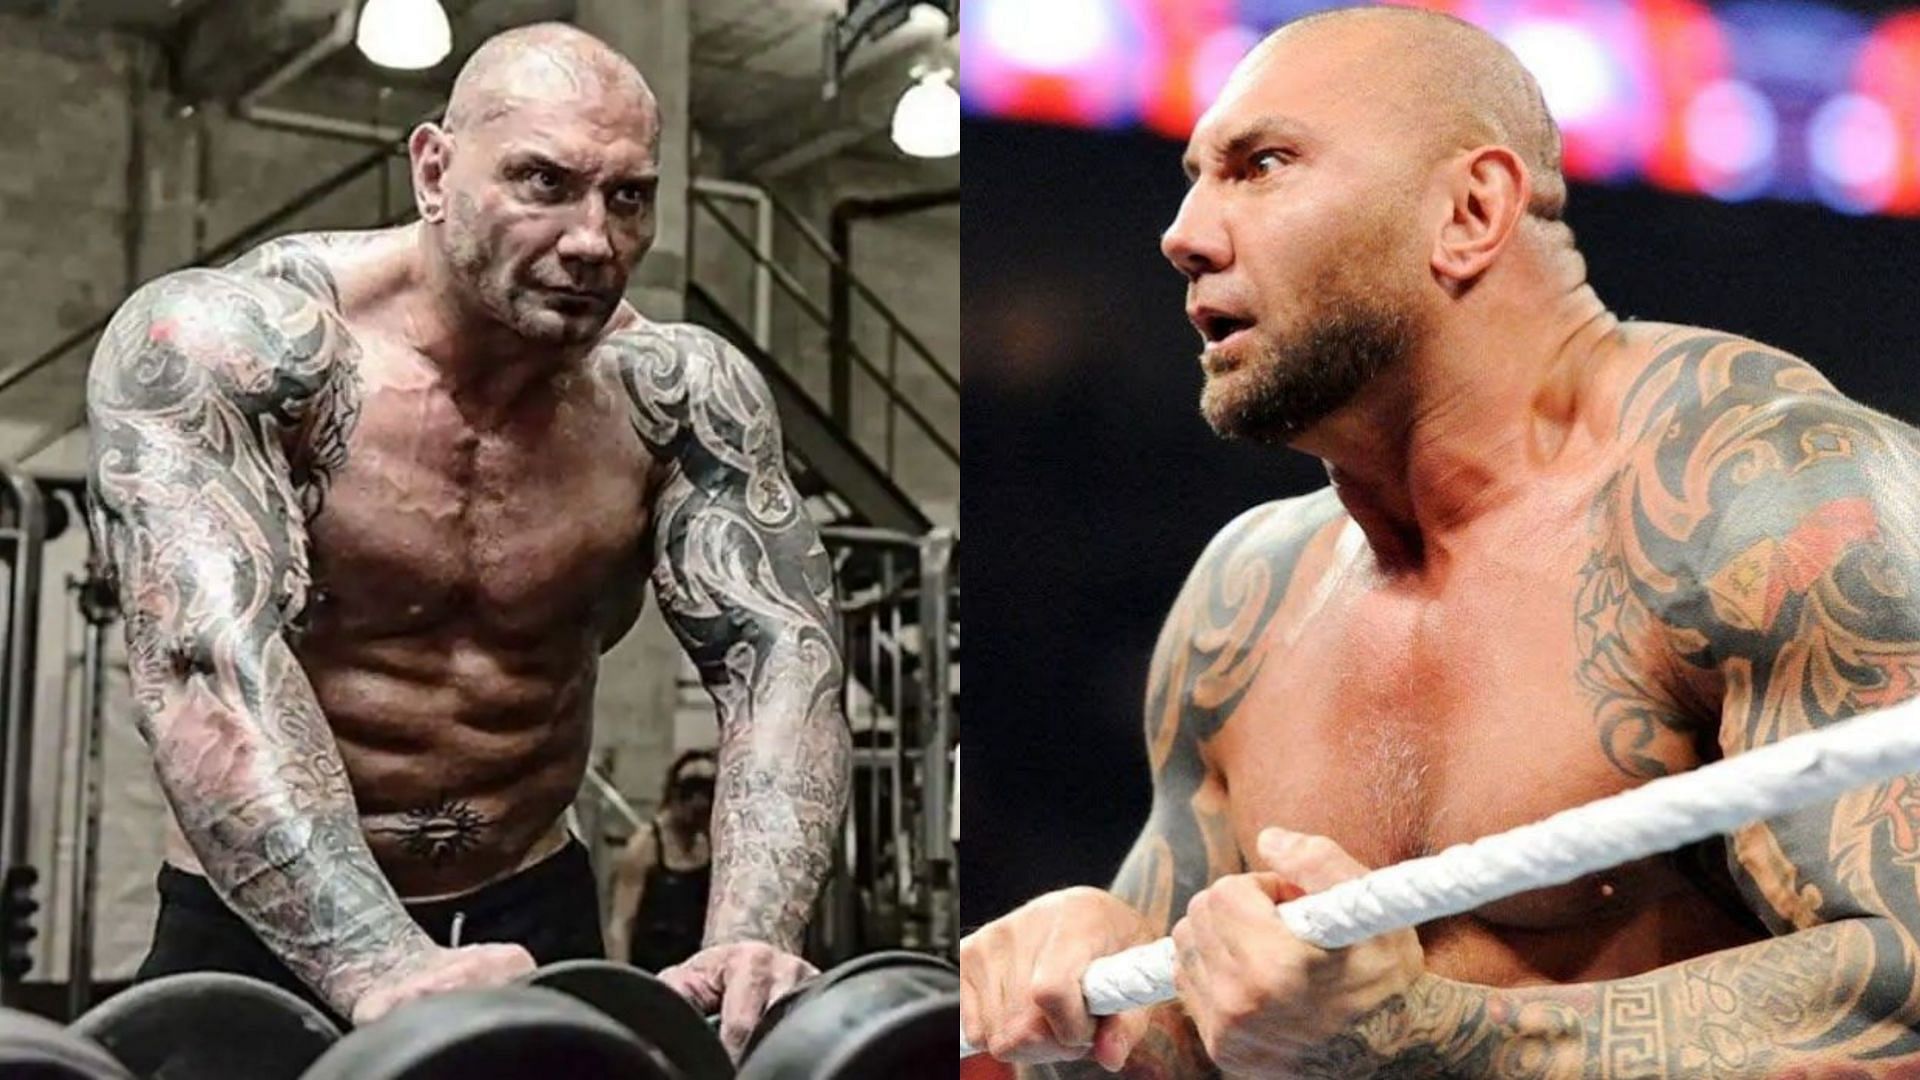 WWE legend Batista allegedly lost a real fight against Slick robbie D in OVW